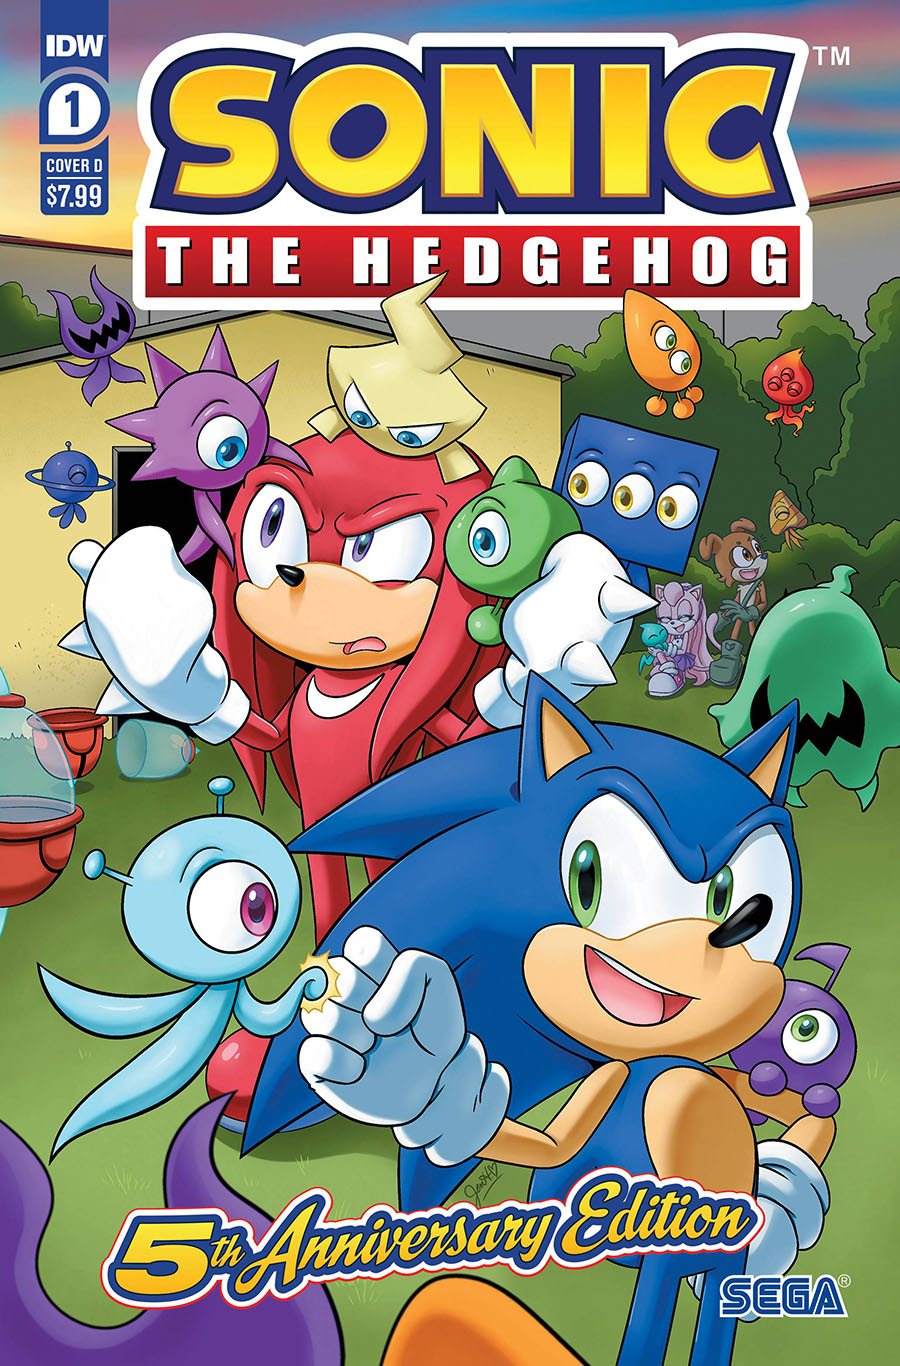 Sonic The Hedgehog Vol 3 #1 5th Anniversary Edition Cover D Variant Jennifer Hernandez Cover